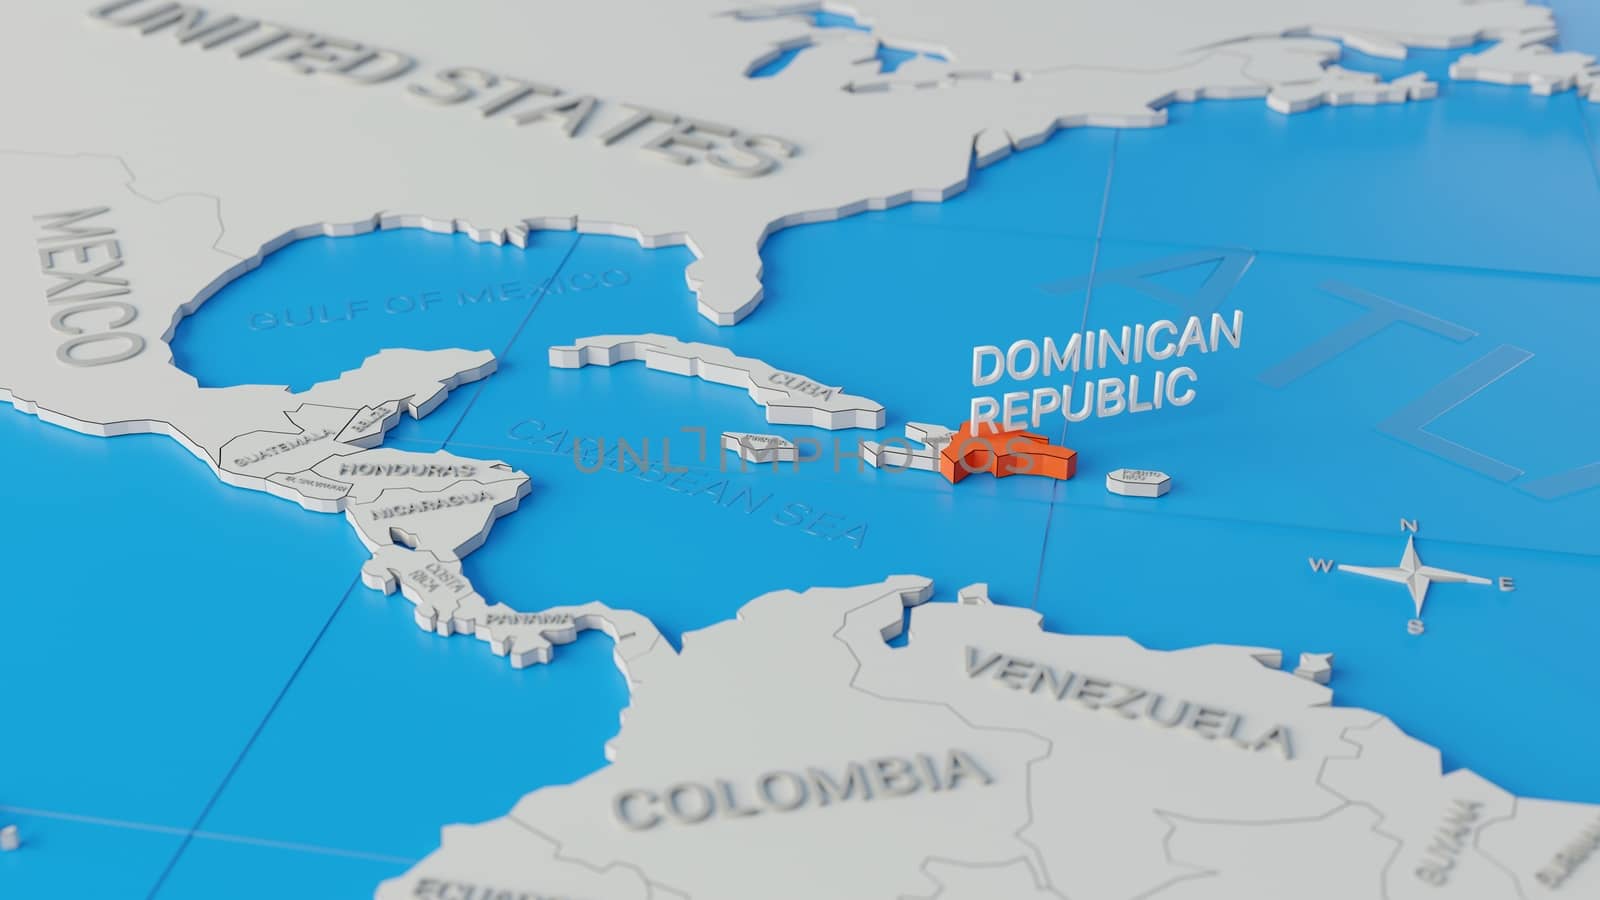 Dominican Republic highlighted on a white simplified 3D world ma by hernan_hyper